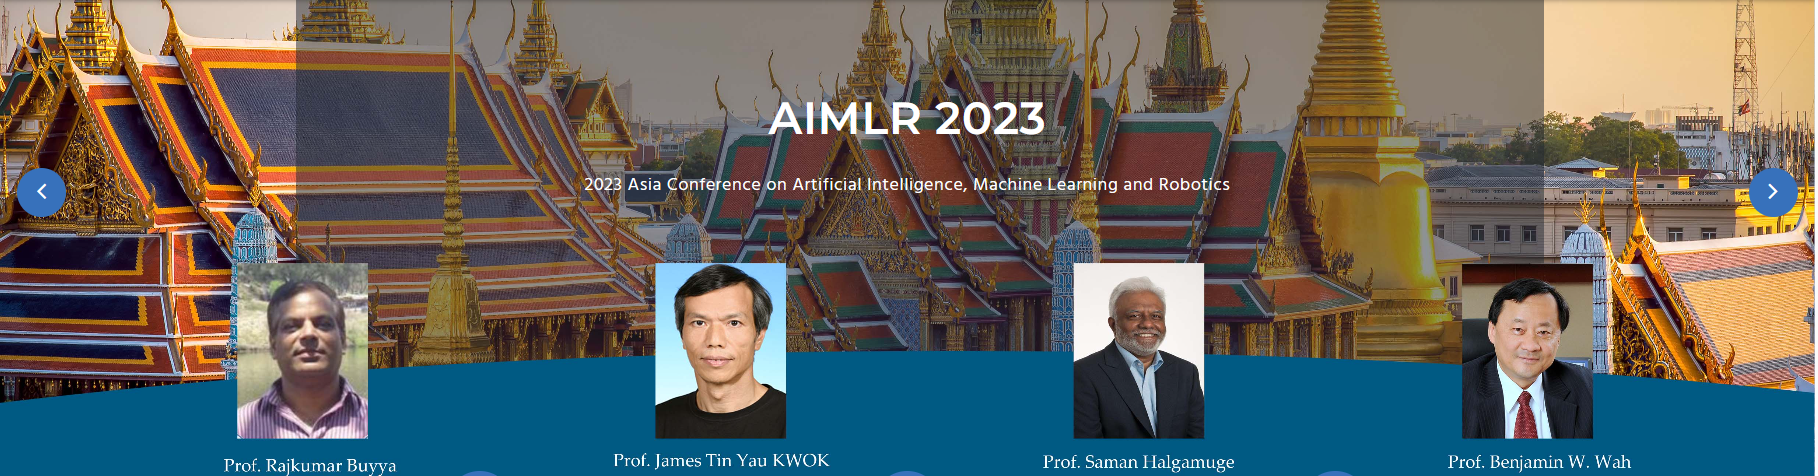 2023 Asia Conference on Artificial Intelligence, Machine Learning and Robotics (AIMLR 2023) -EI Compendex, Bangkok, Thailand